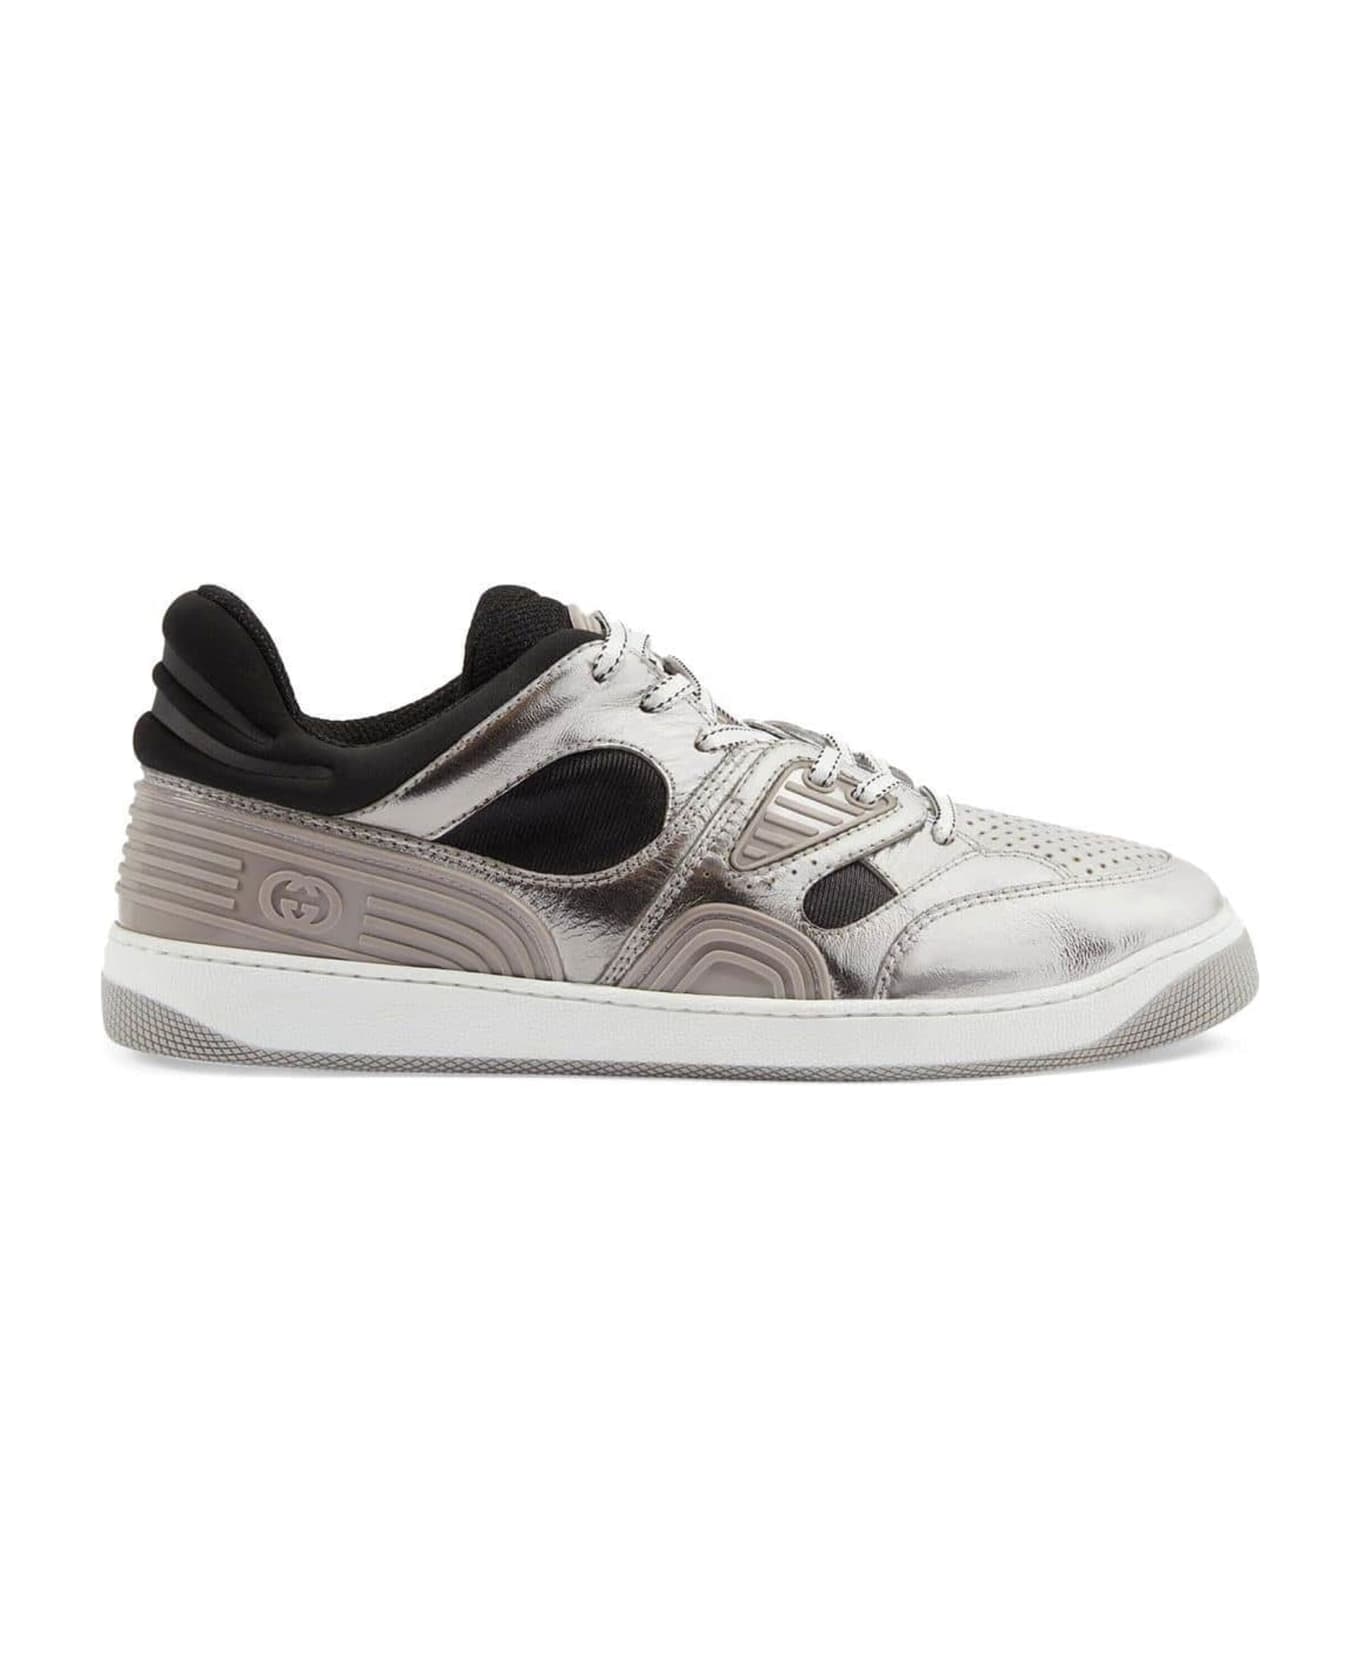 Gucci Leather Basket Sneakers - Silver